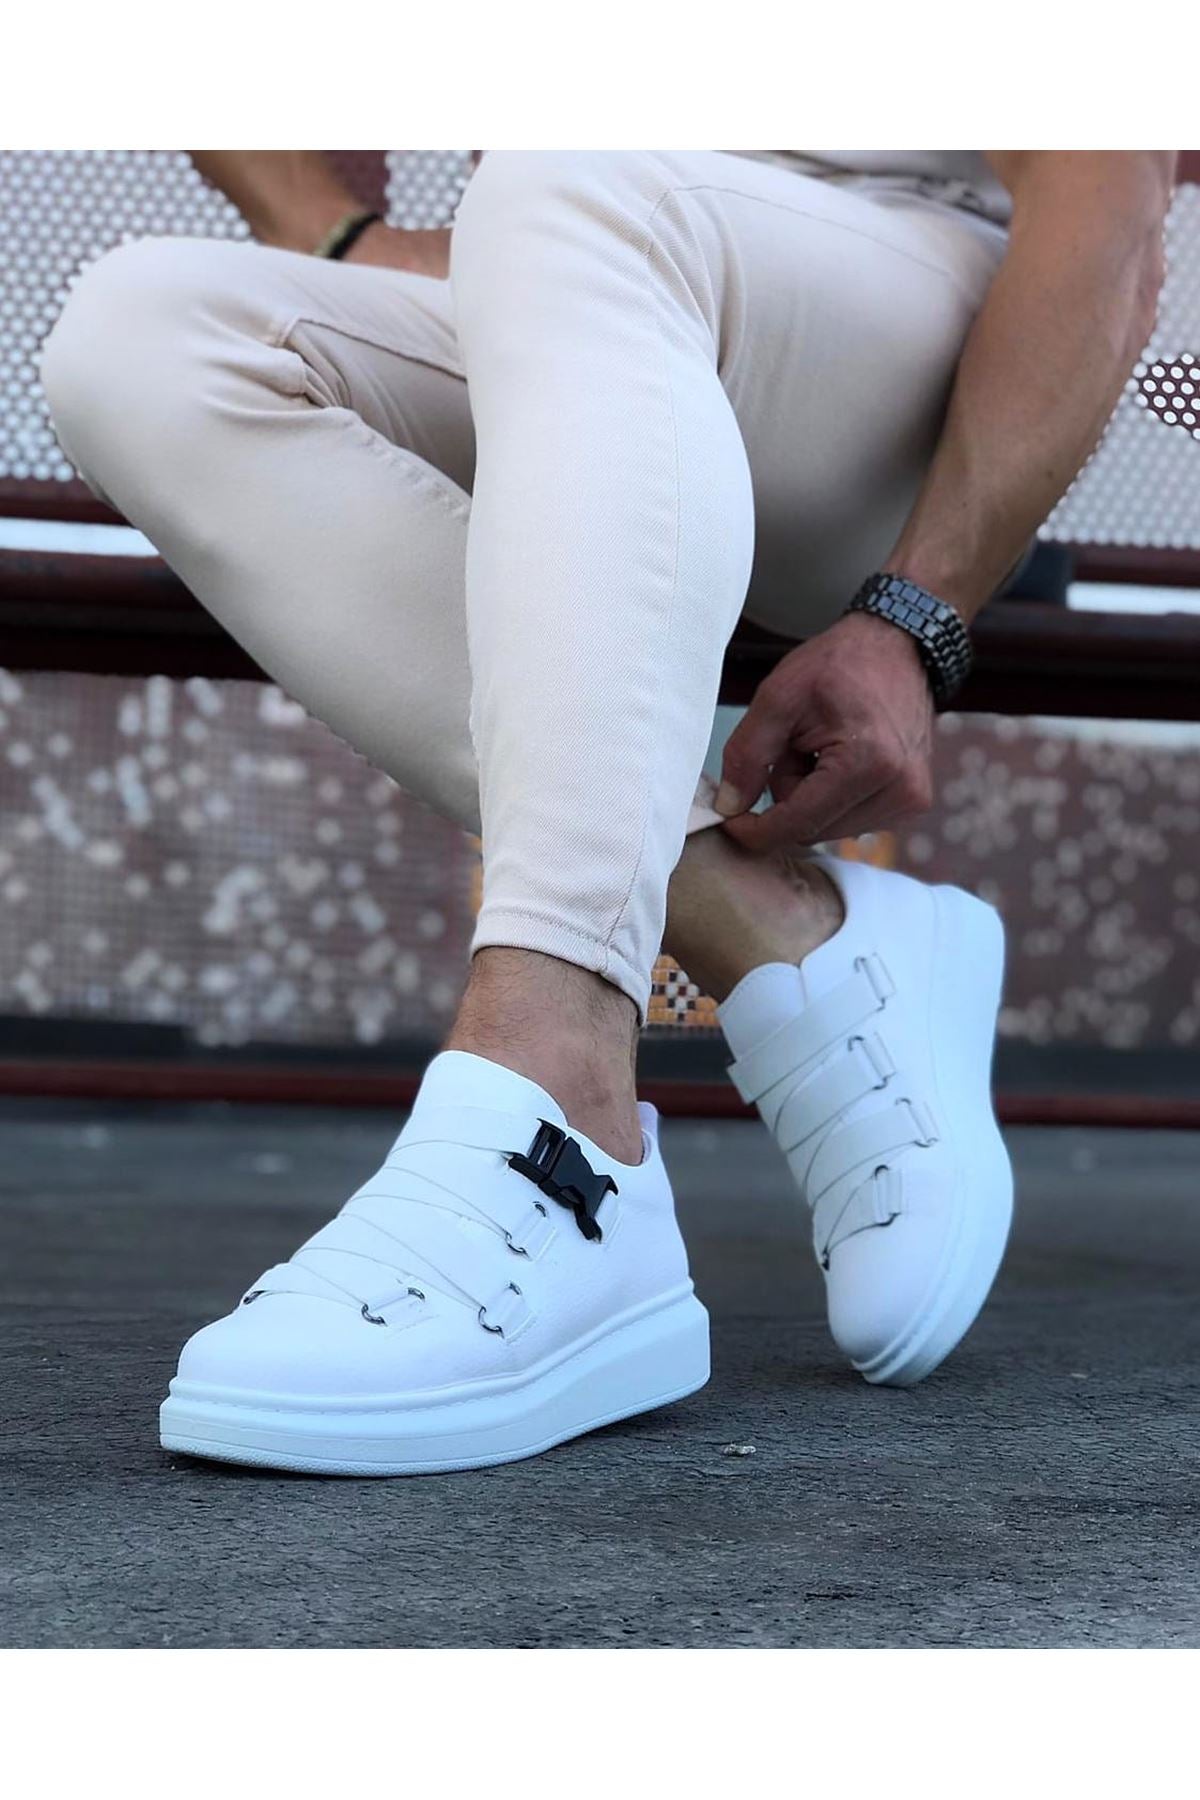 WG033 White Men's High-Sole Shoes Sneakers - STREETMODE™